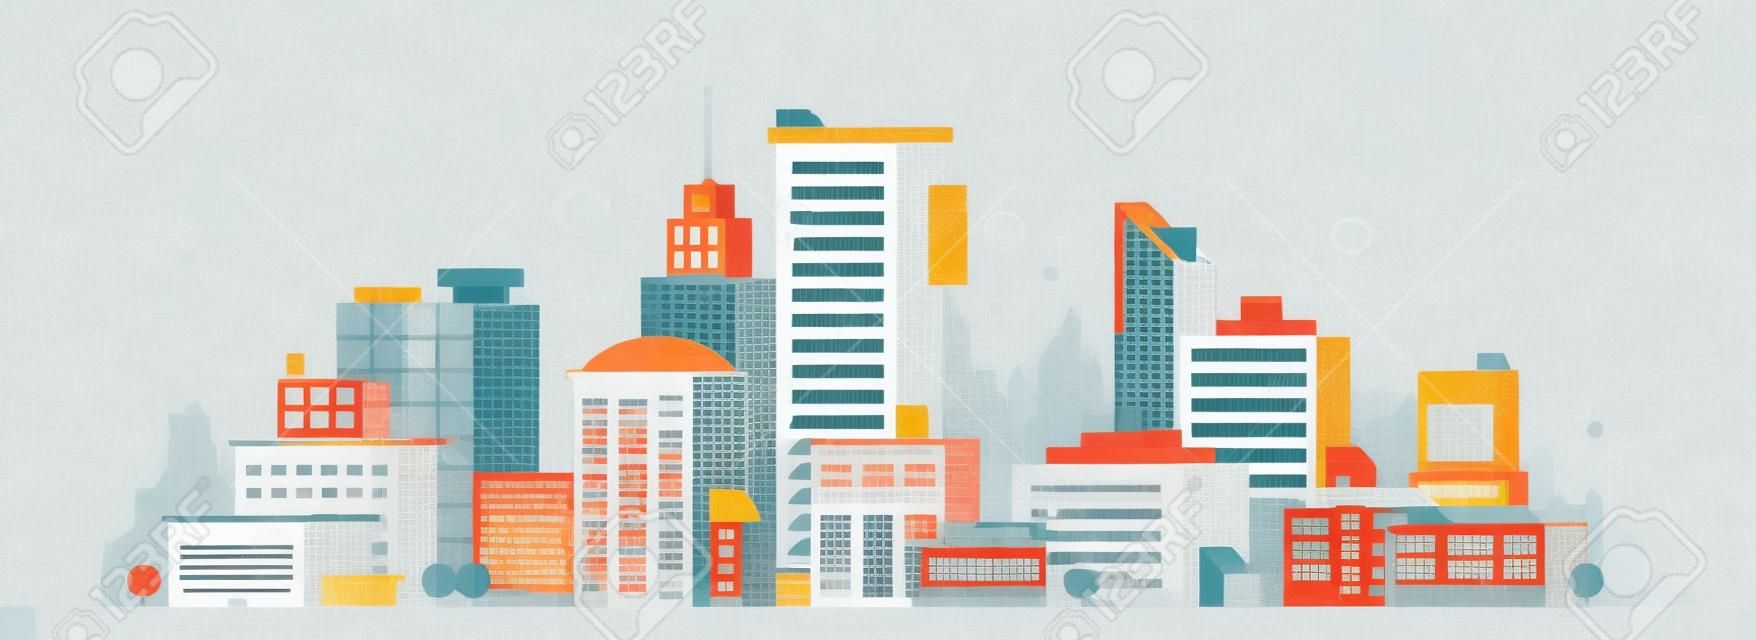 City illustration. Towers and buildings in modern flat style on white background